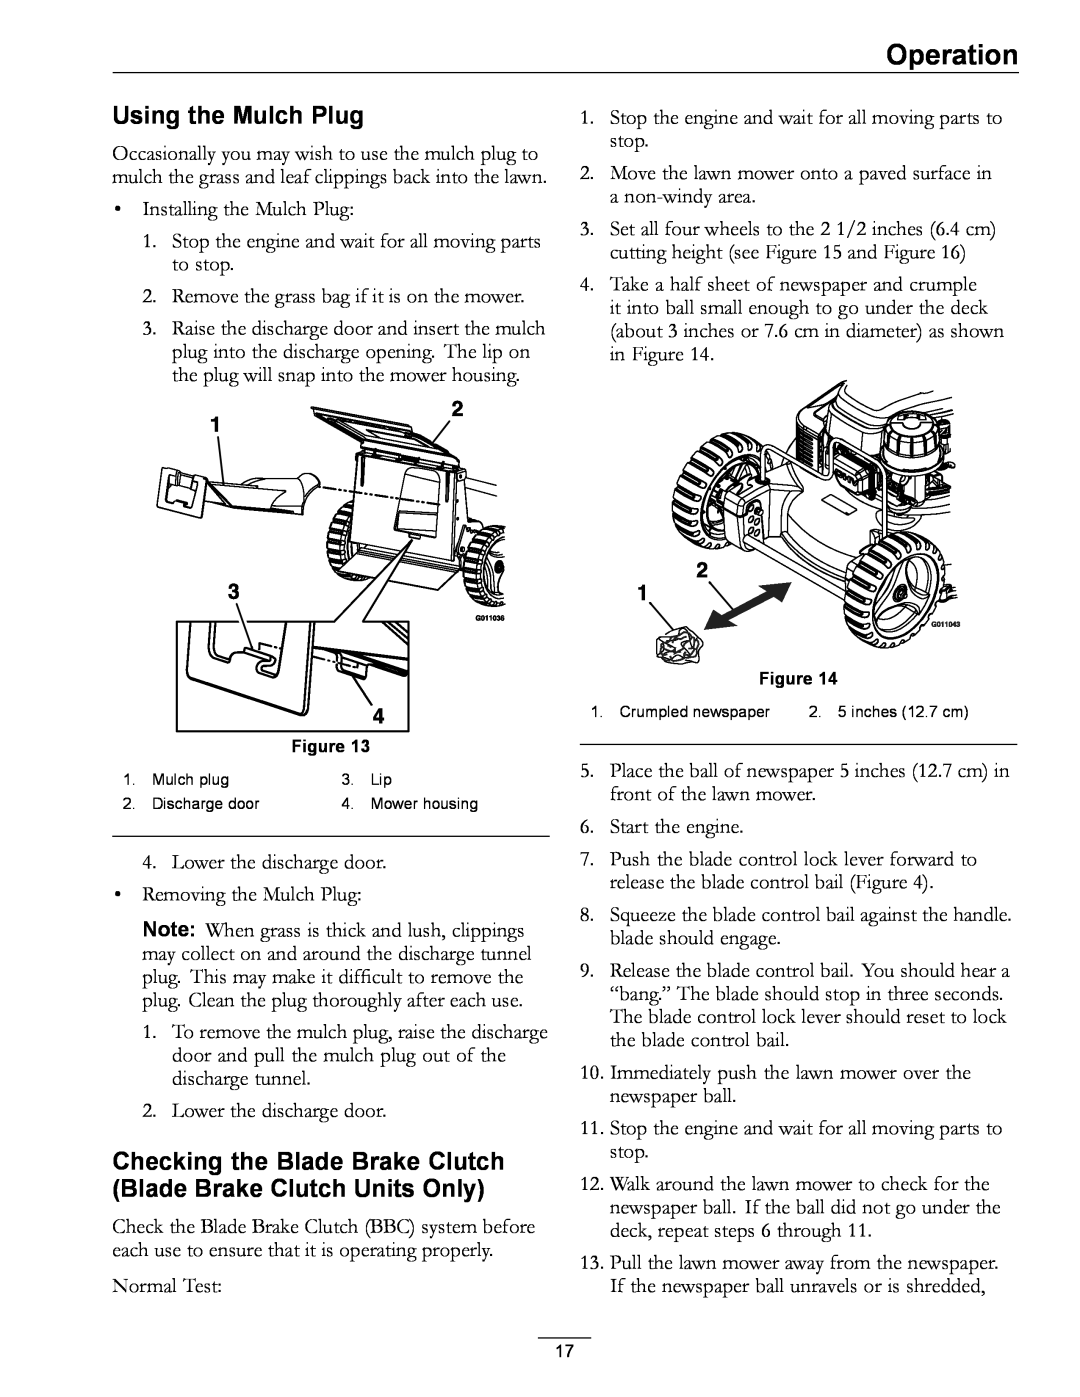 Exmark COMMERCIAL 21 manual Using the Mulch Plug, Checking the Blade Brake Clutch Blade Brake Clutch Units Only, Operation 